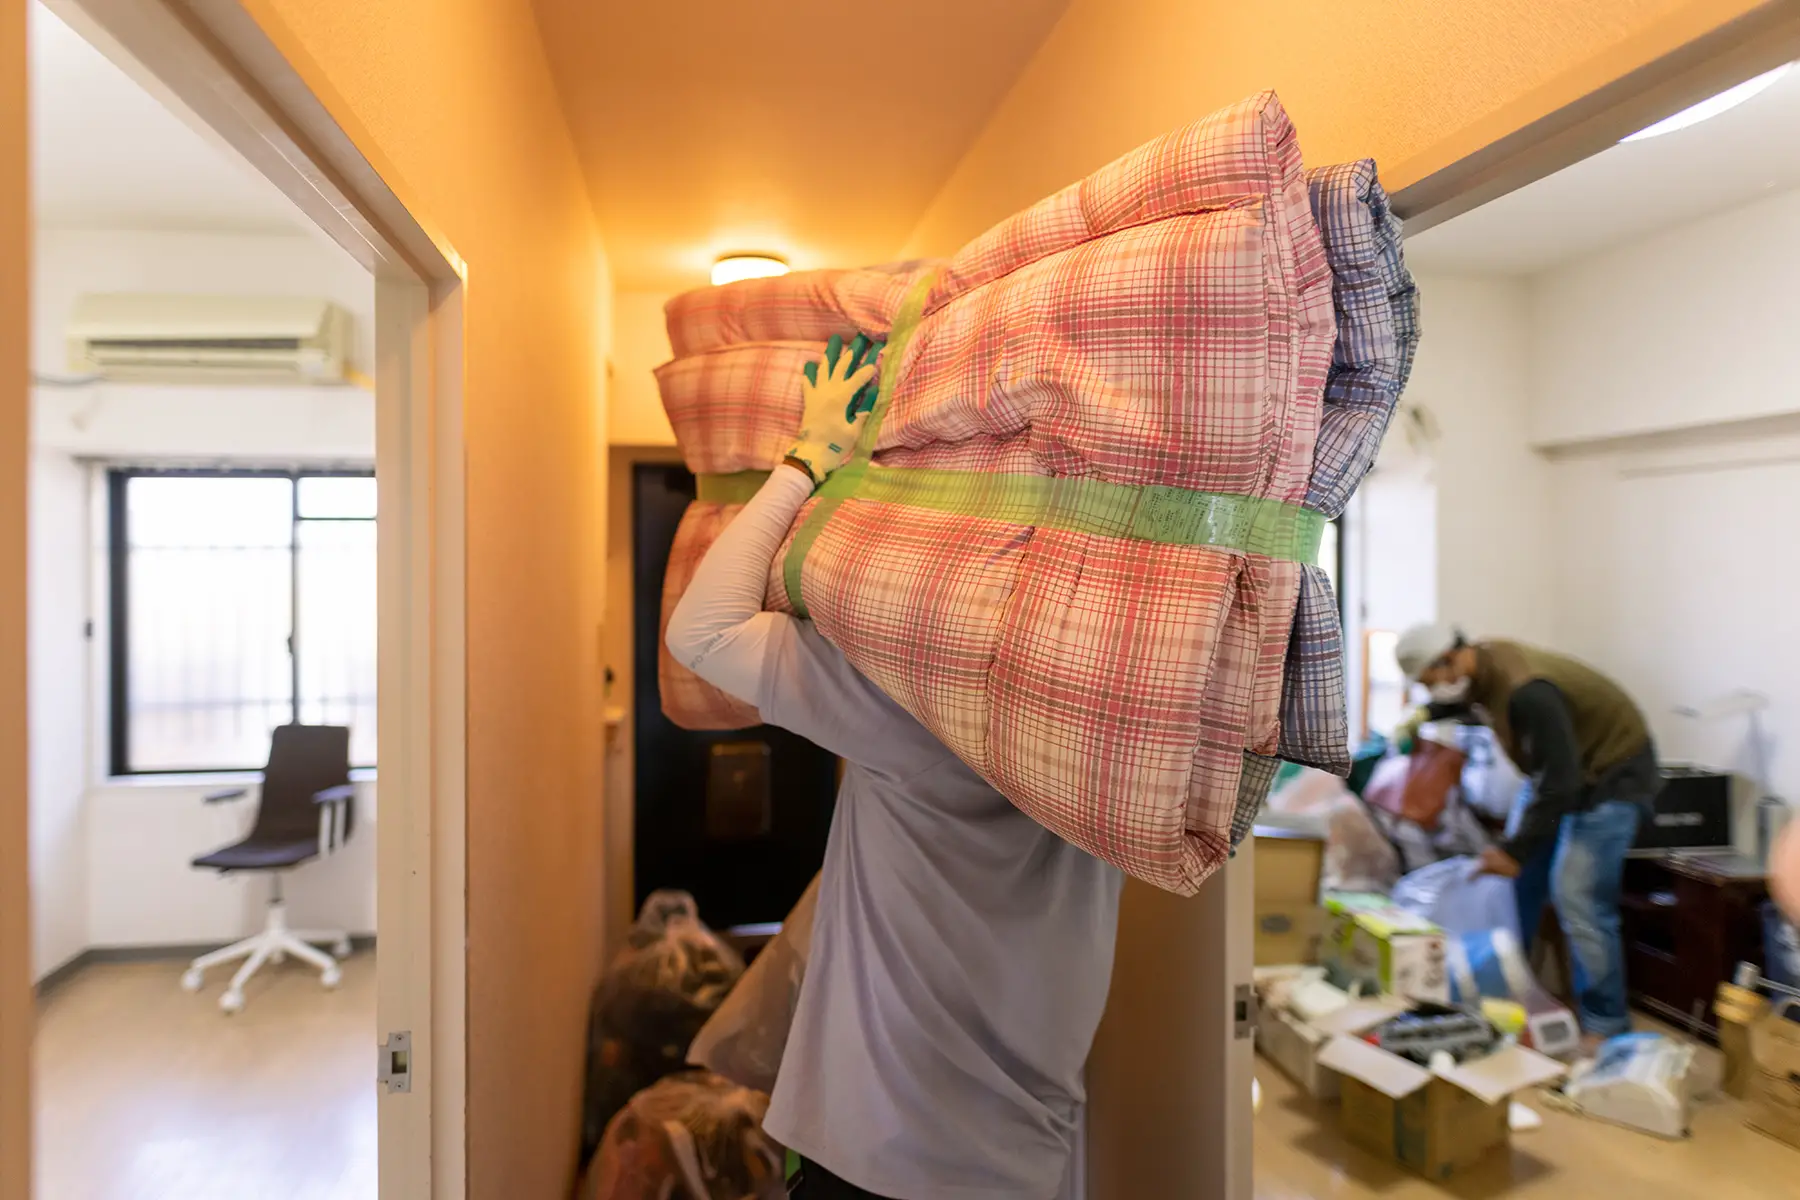 A family unpack in their new apartment, a person is carrying a couple of folded up futon mattresses